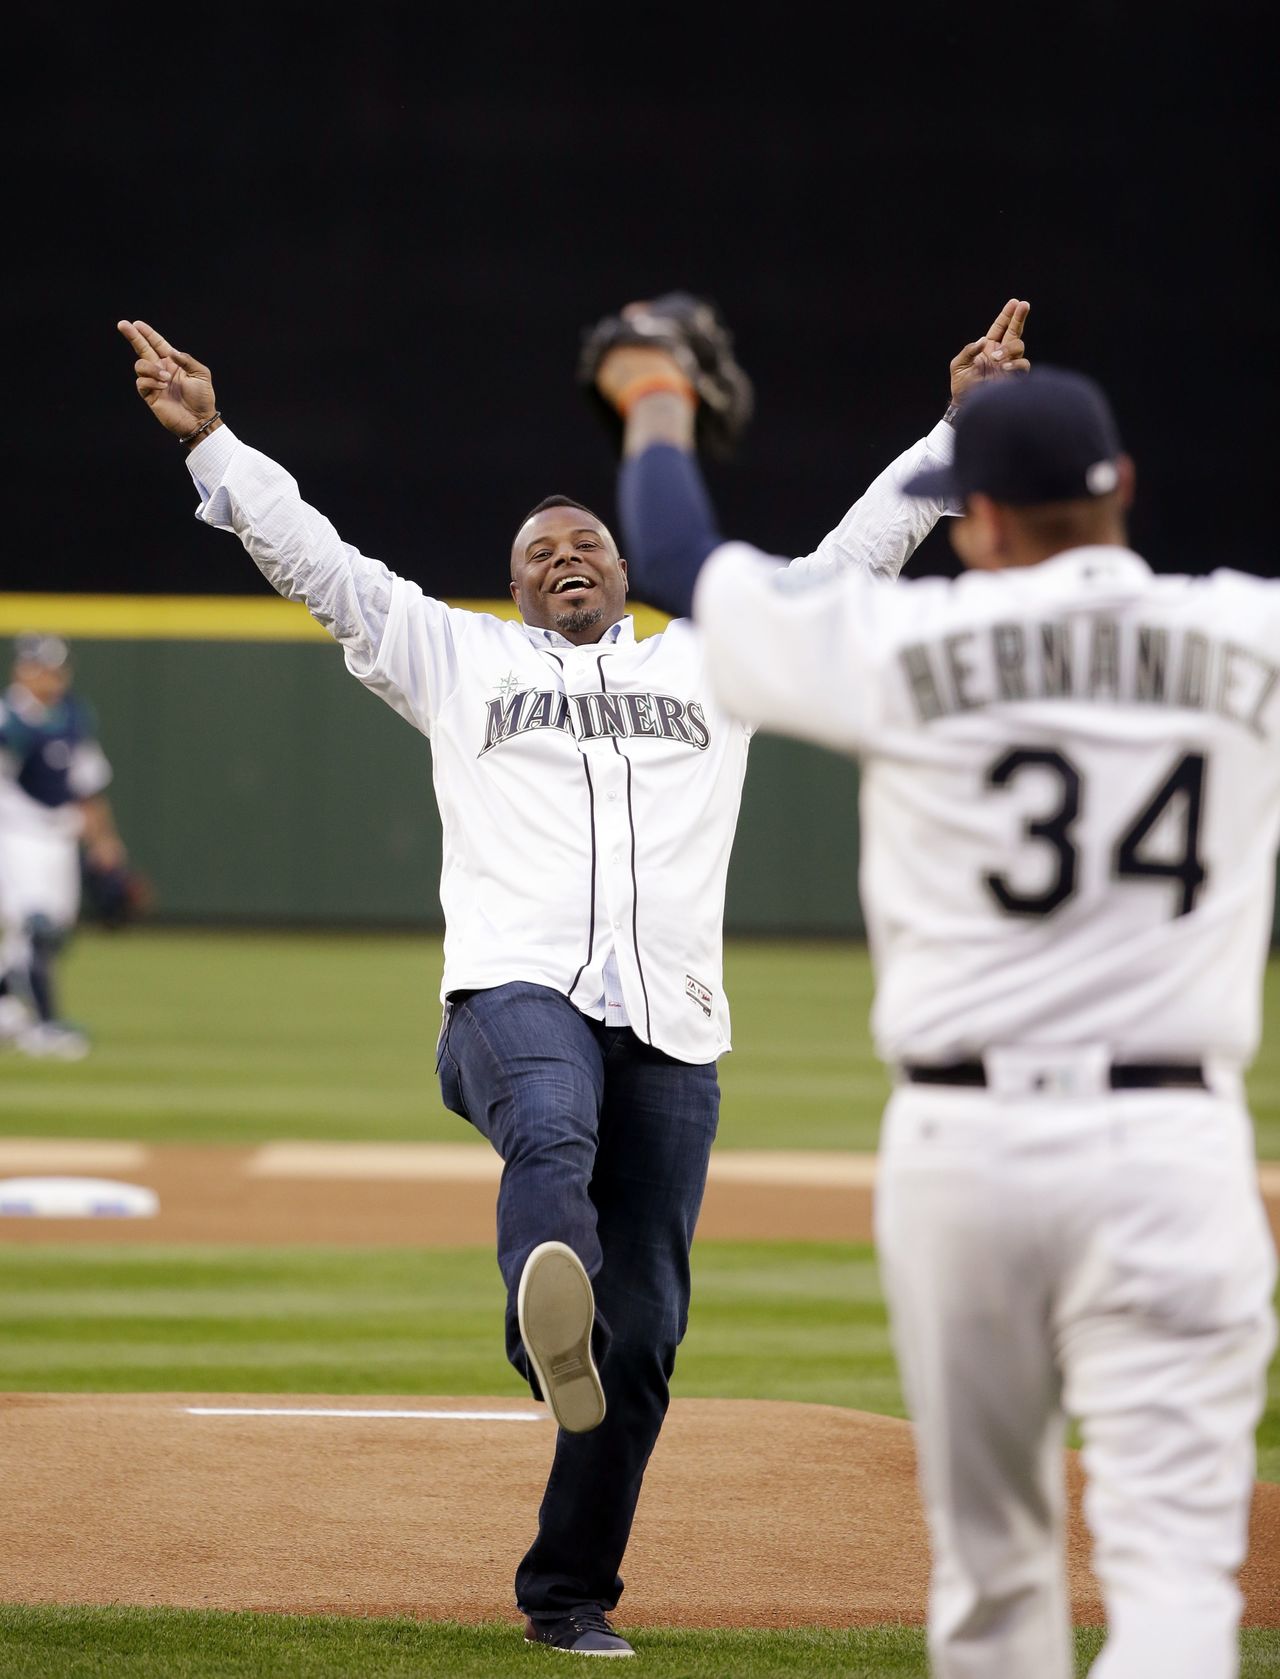 Mariner great Ken Griffey Jr. playfully mimics the motion made by pitcher Felix Hernandez (34) from a no-hitter years earlier after Griffey threw out the ceremonial first pitch before the Mariners’ home-opener against the Athletics on Friday in Seattle.